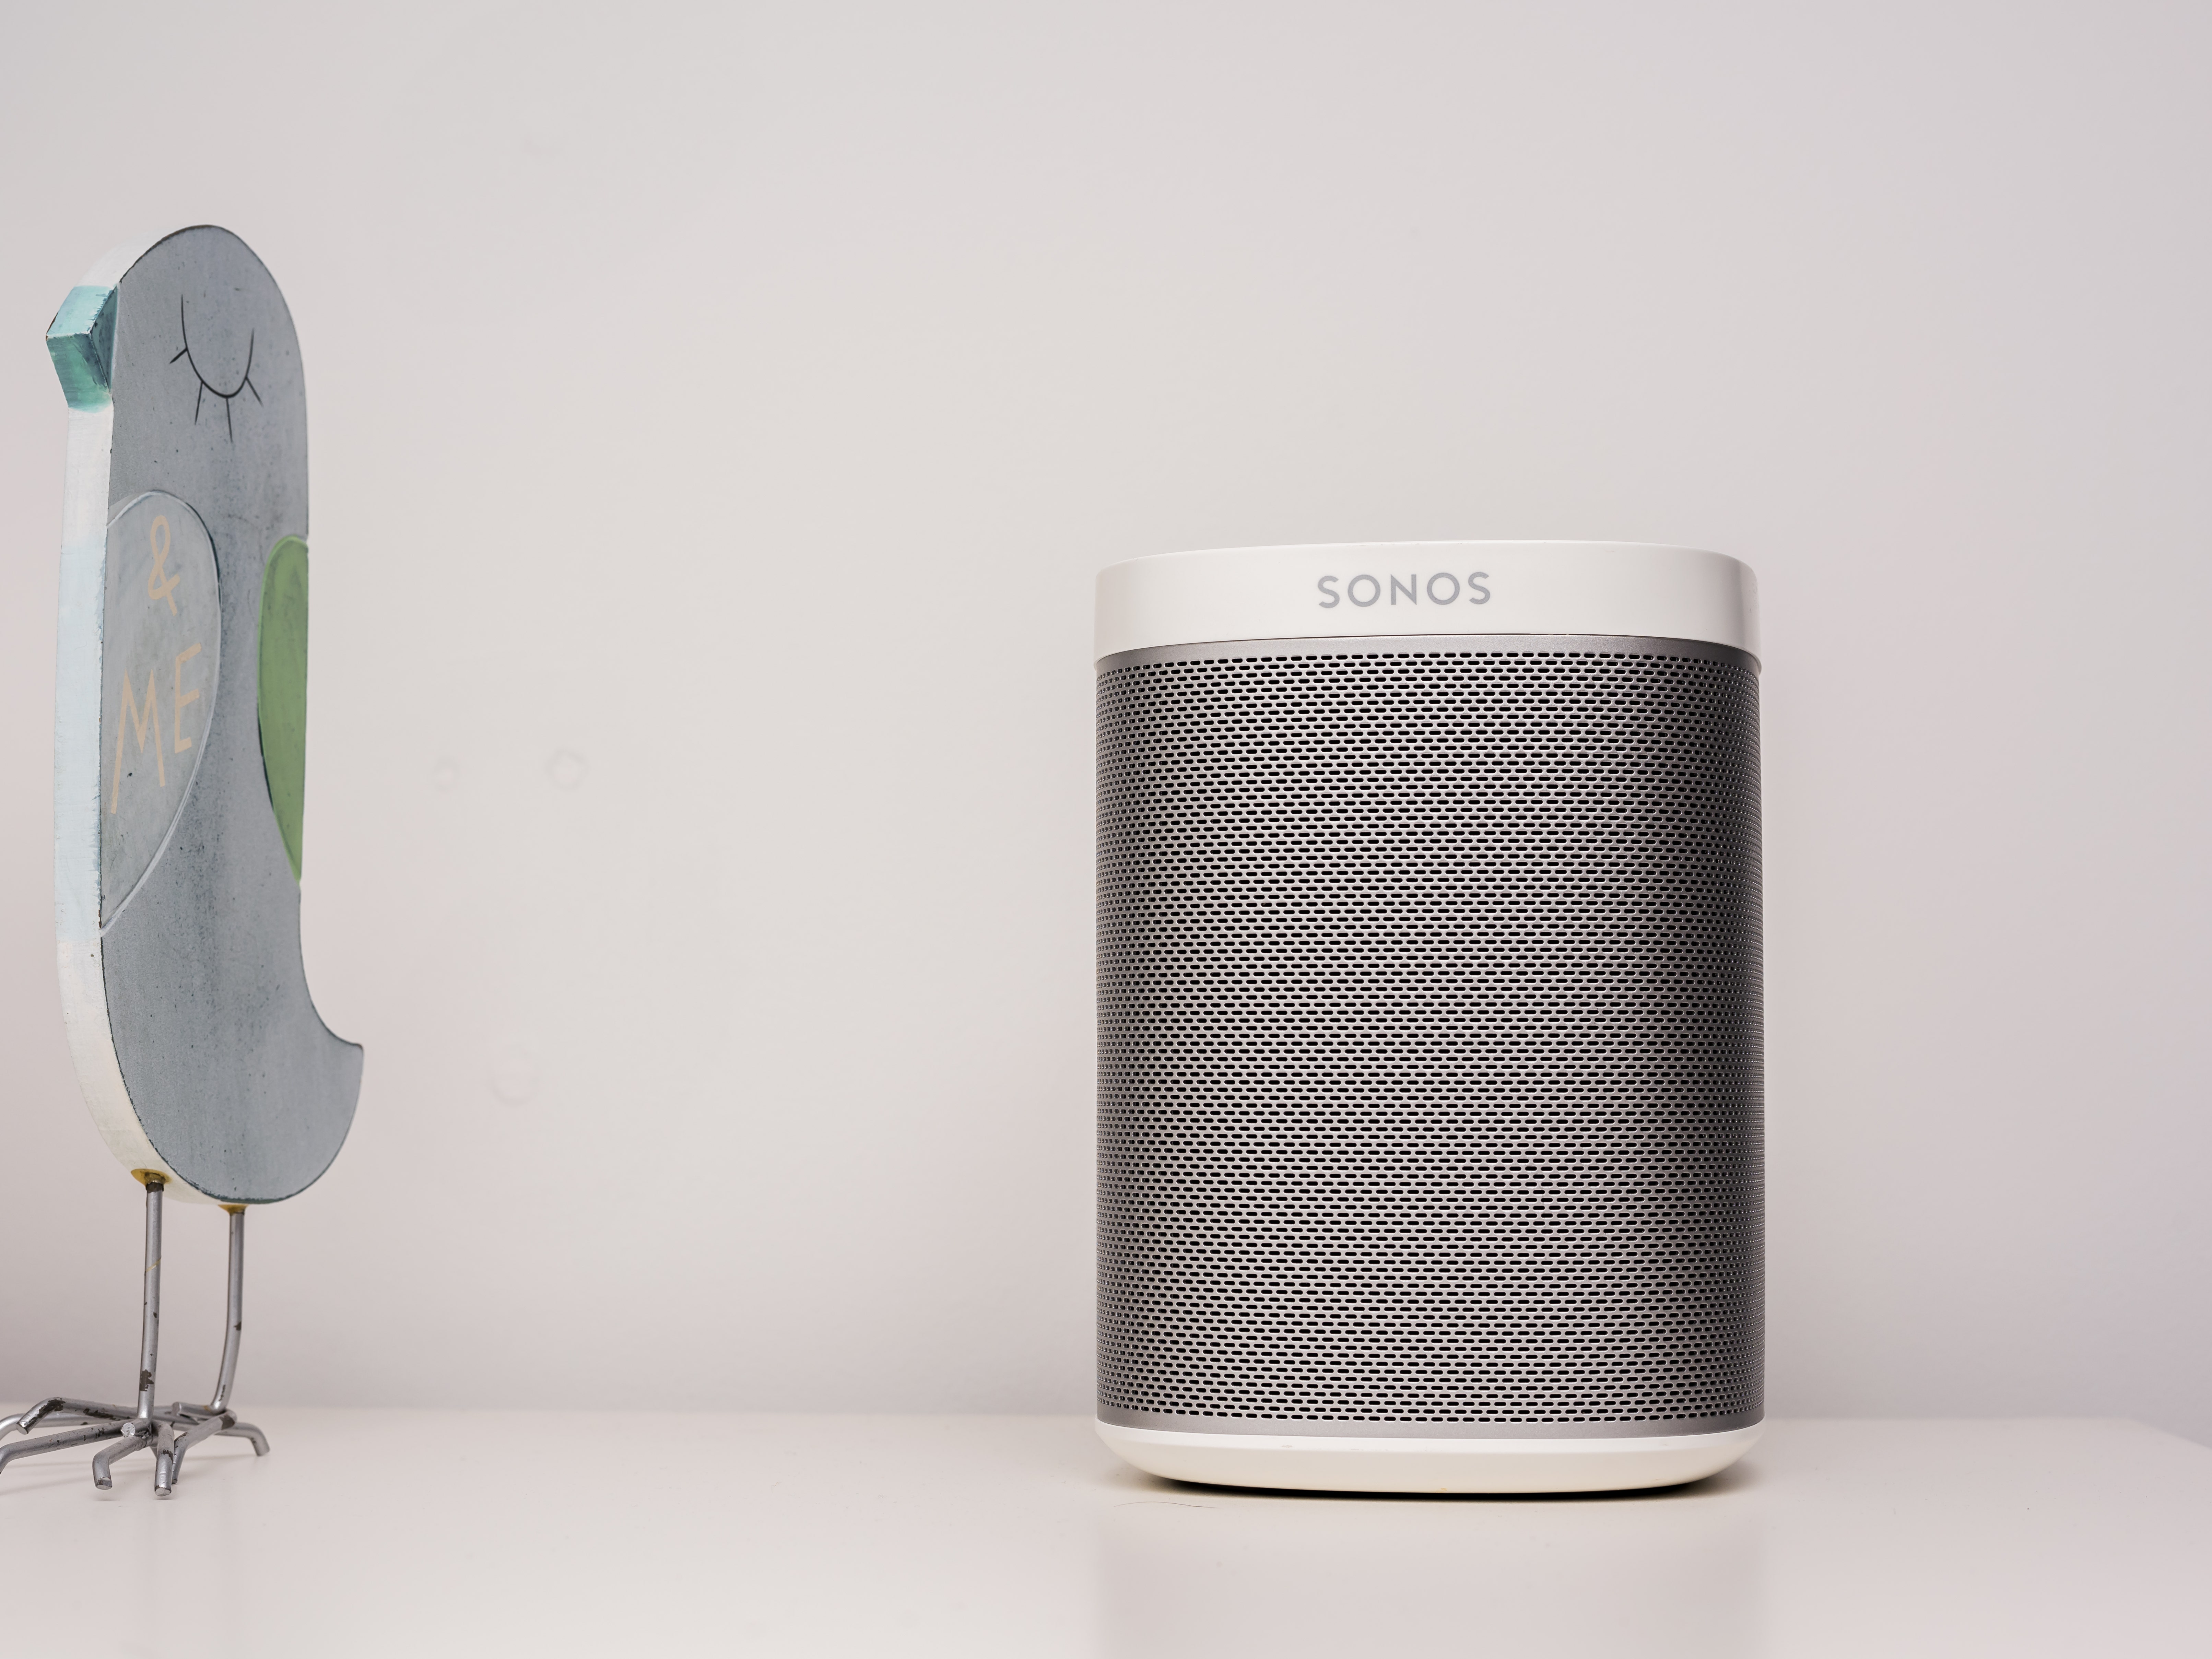 auktion vulgaritet Underholde Sonos Stock Is Beaten Down And Significantly Undervalued | Seeking Alpha